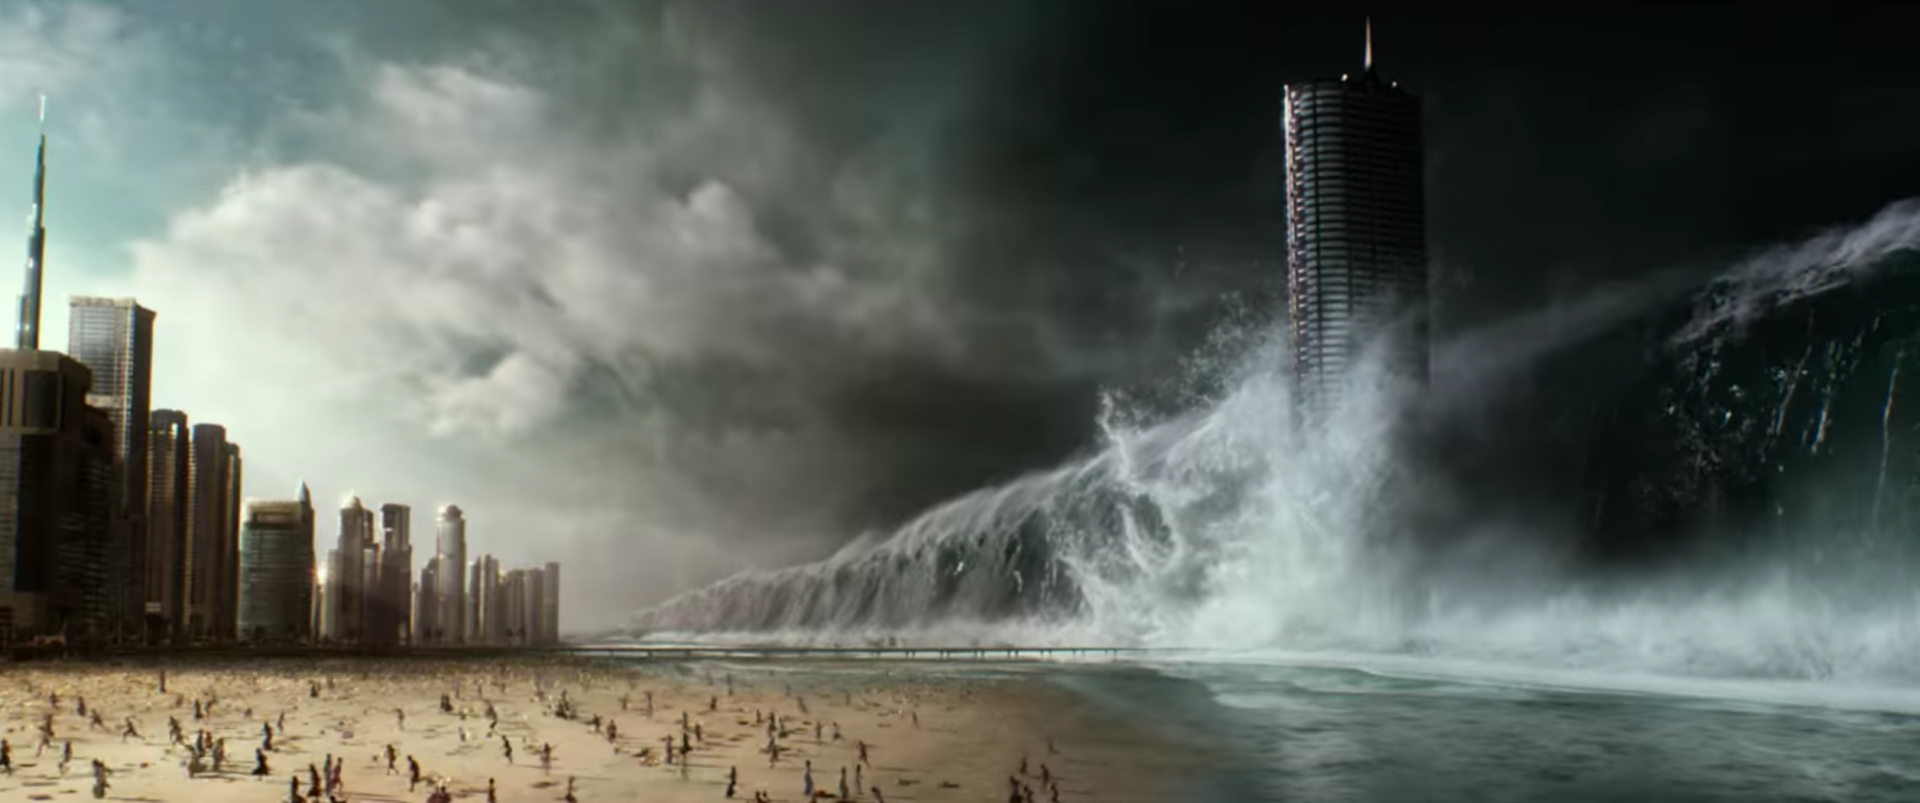 The weather hates us in first destructive teaser for ‘Geostorm’